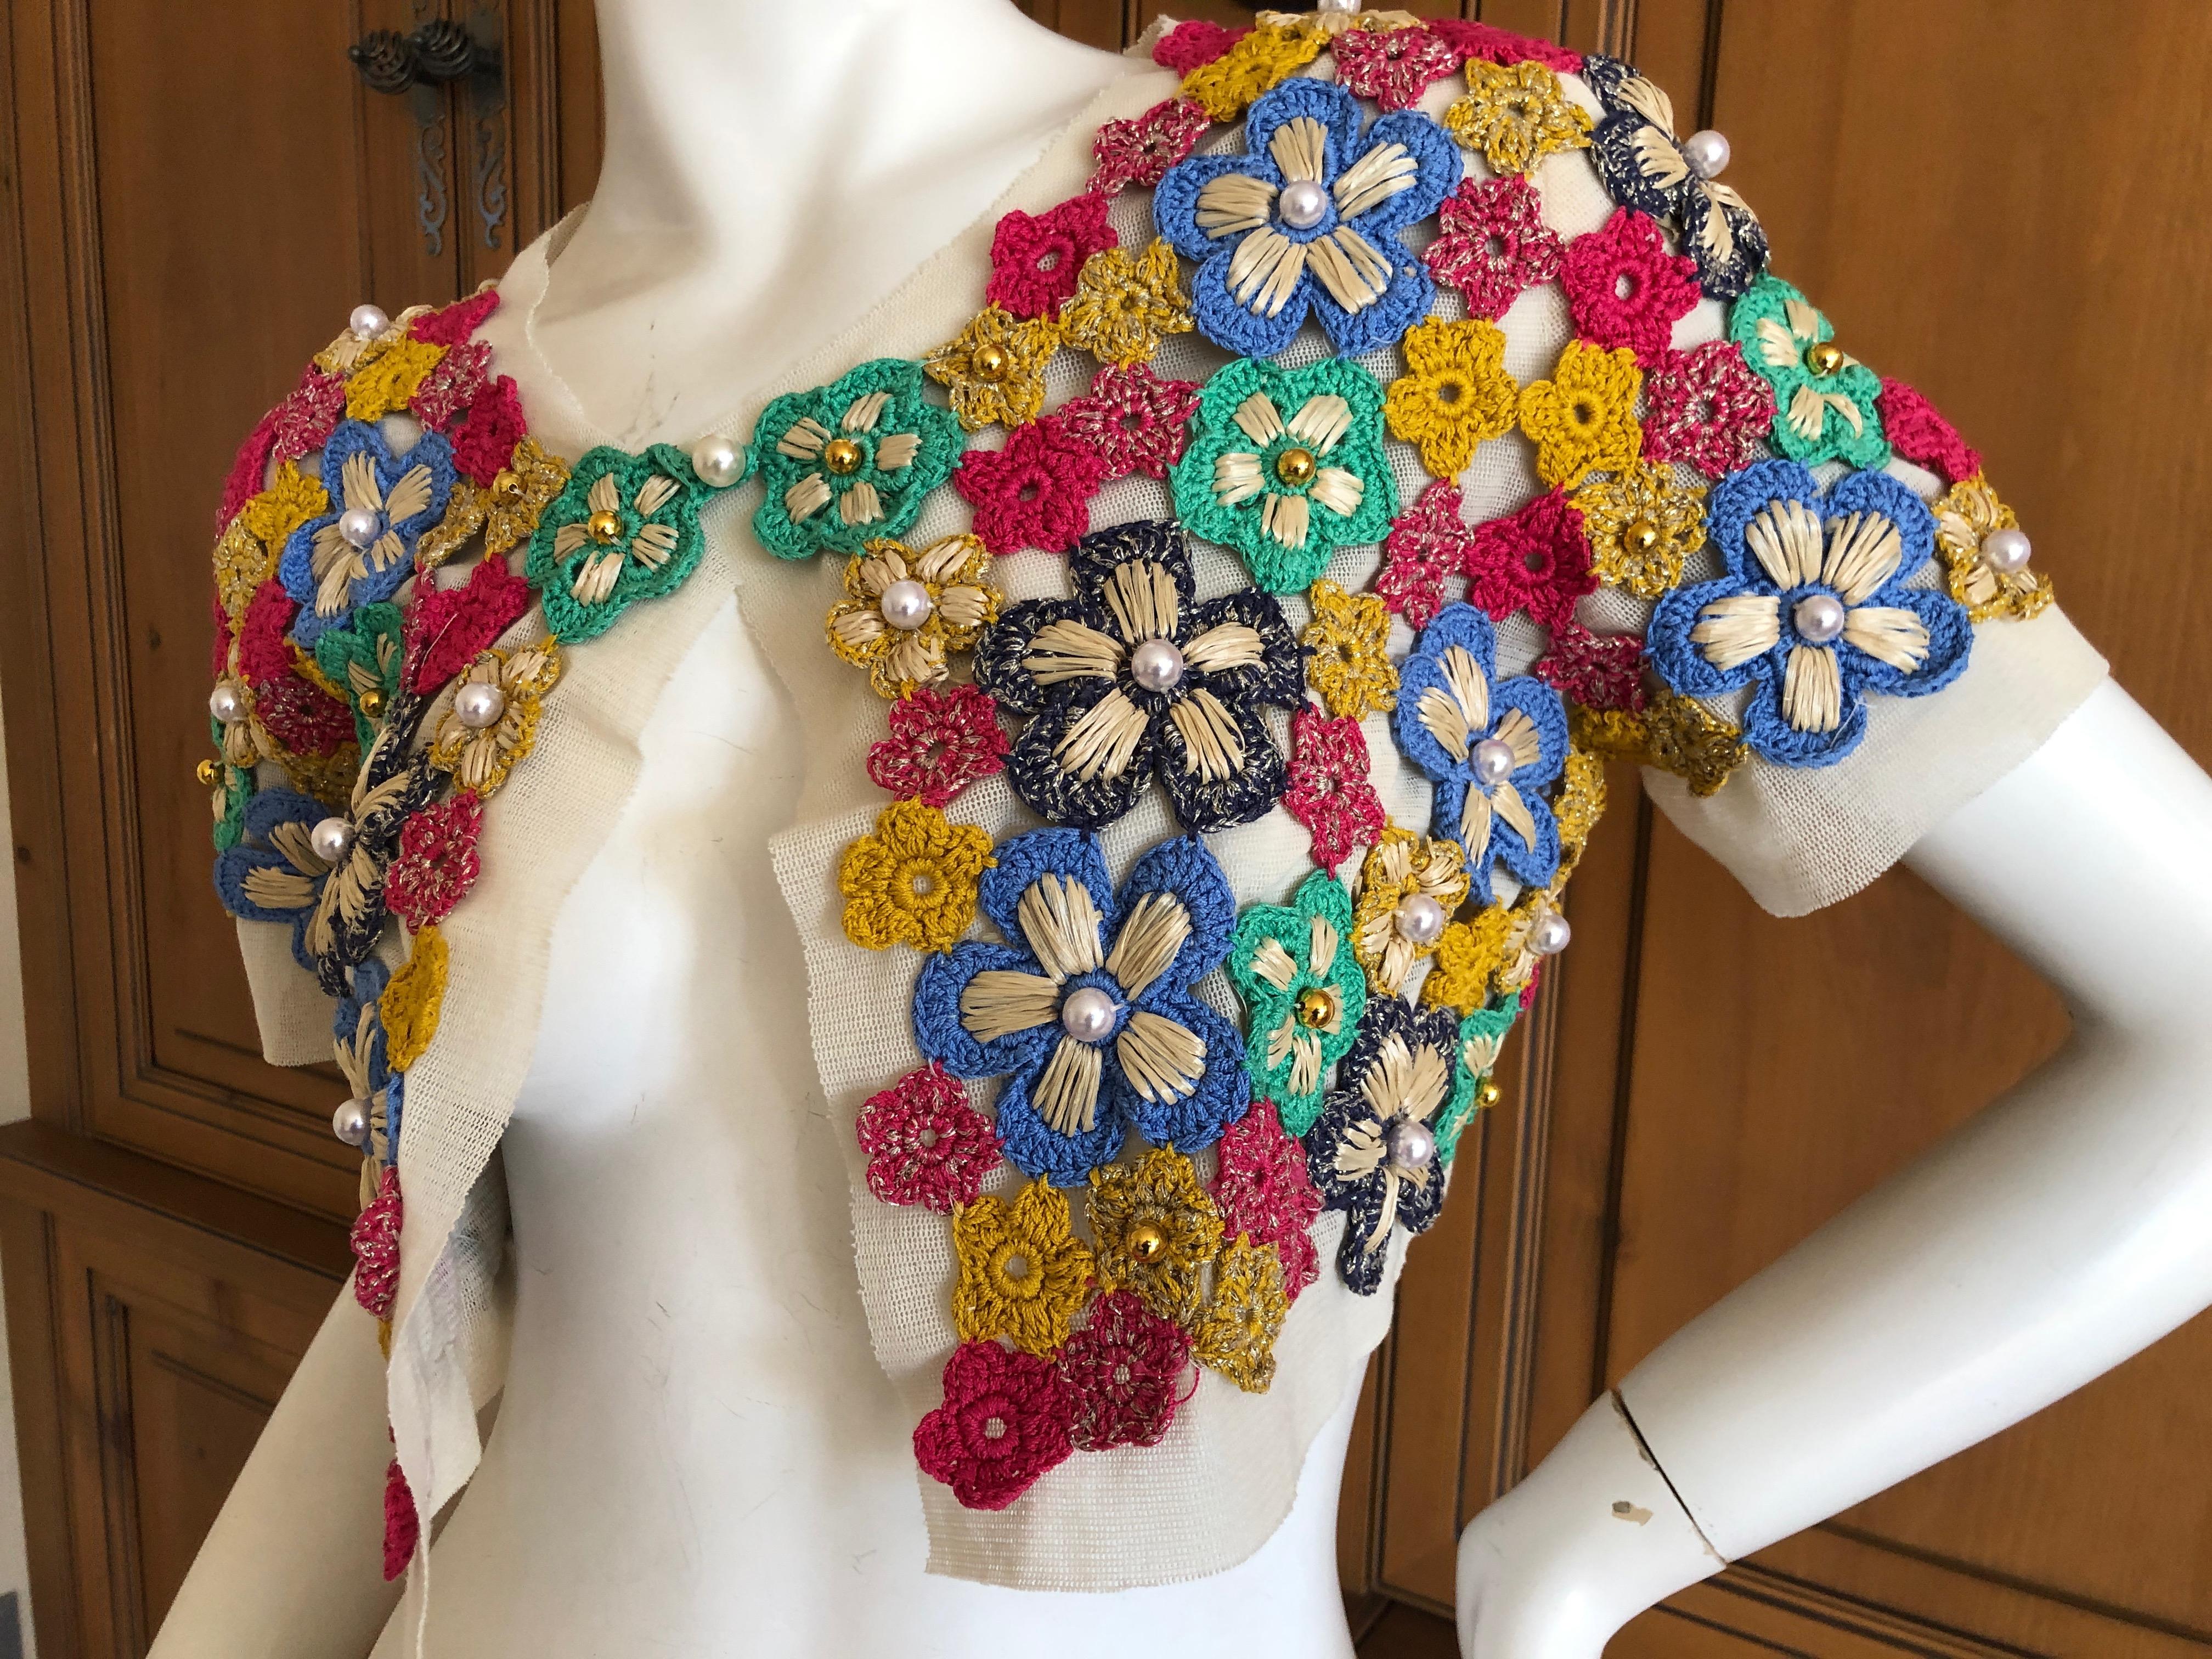 Moschino Hippy Chick Crochet Embellished Shrug for Cheap & Chic In Excellent Condition For Sale In Cloverdale, CA